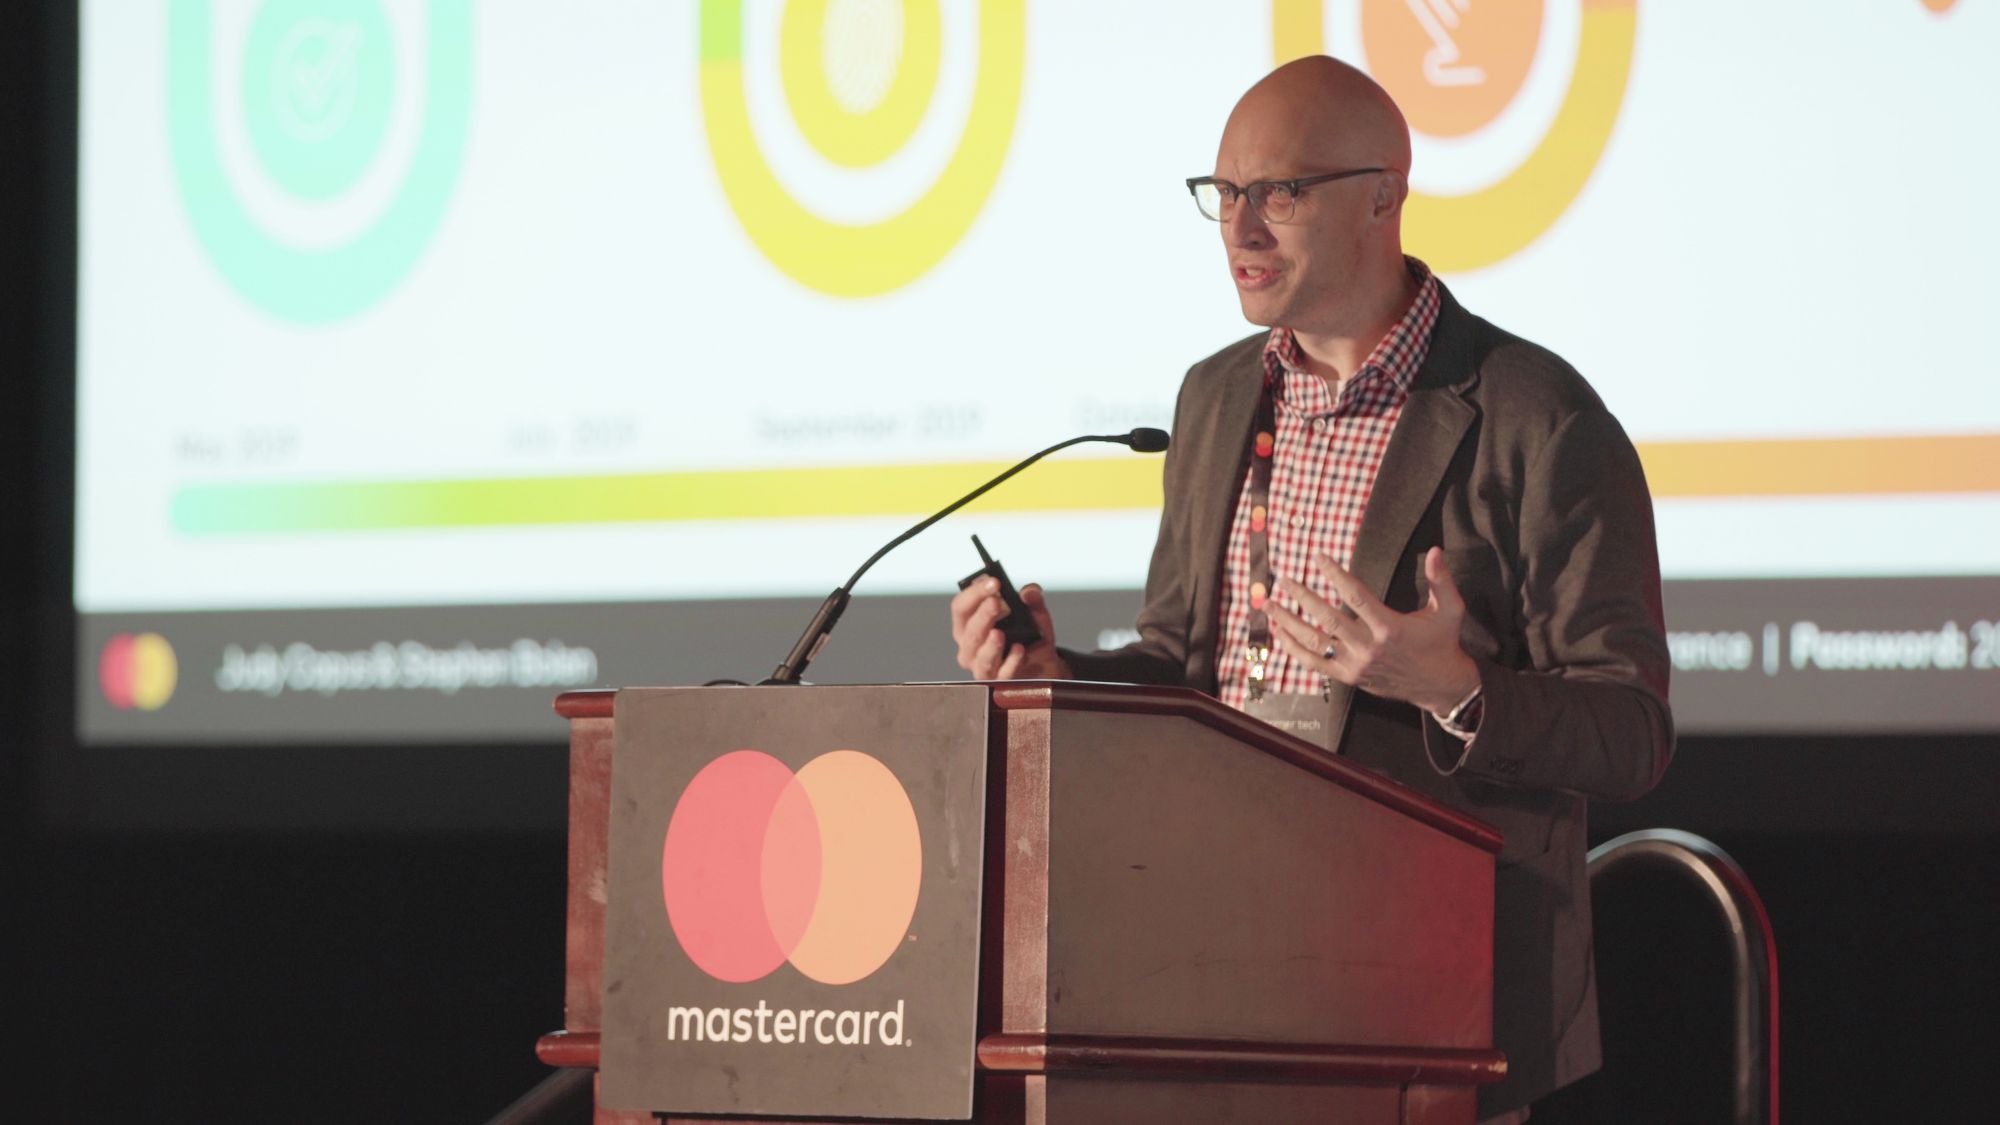 Stephen Bolen presenting at a Mastercard technical conference.